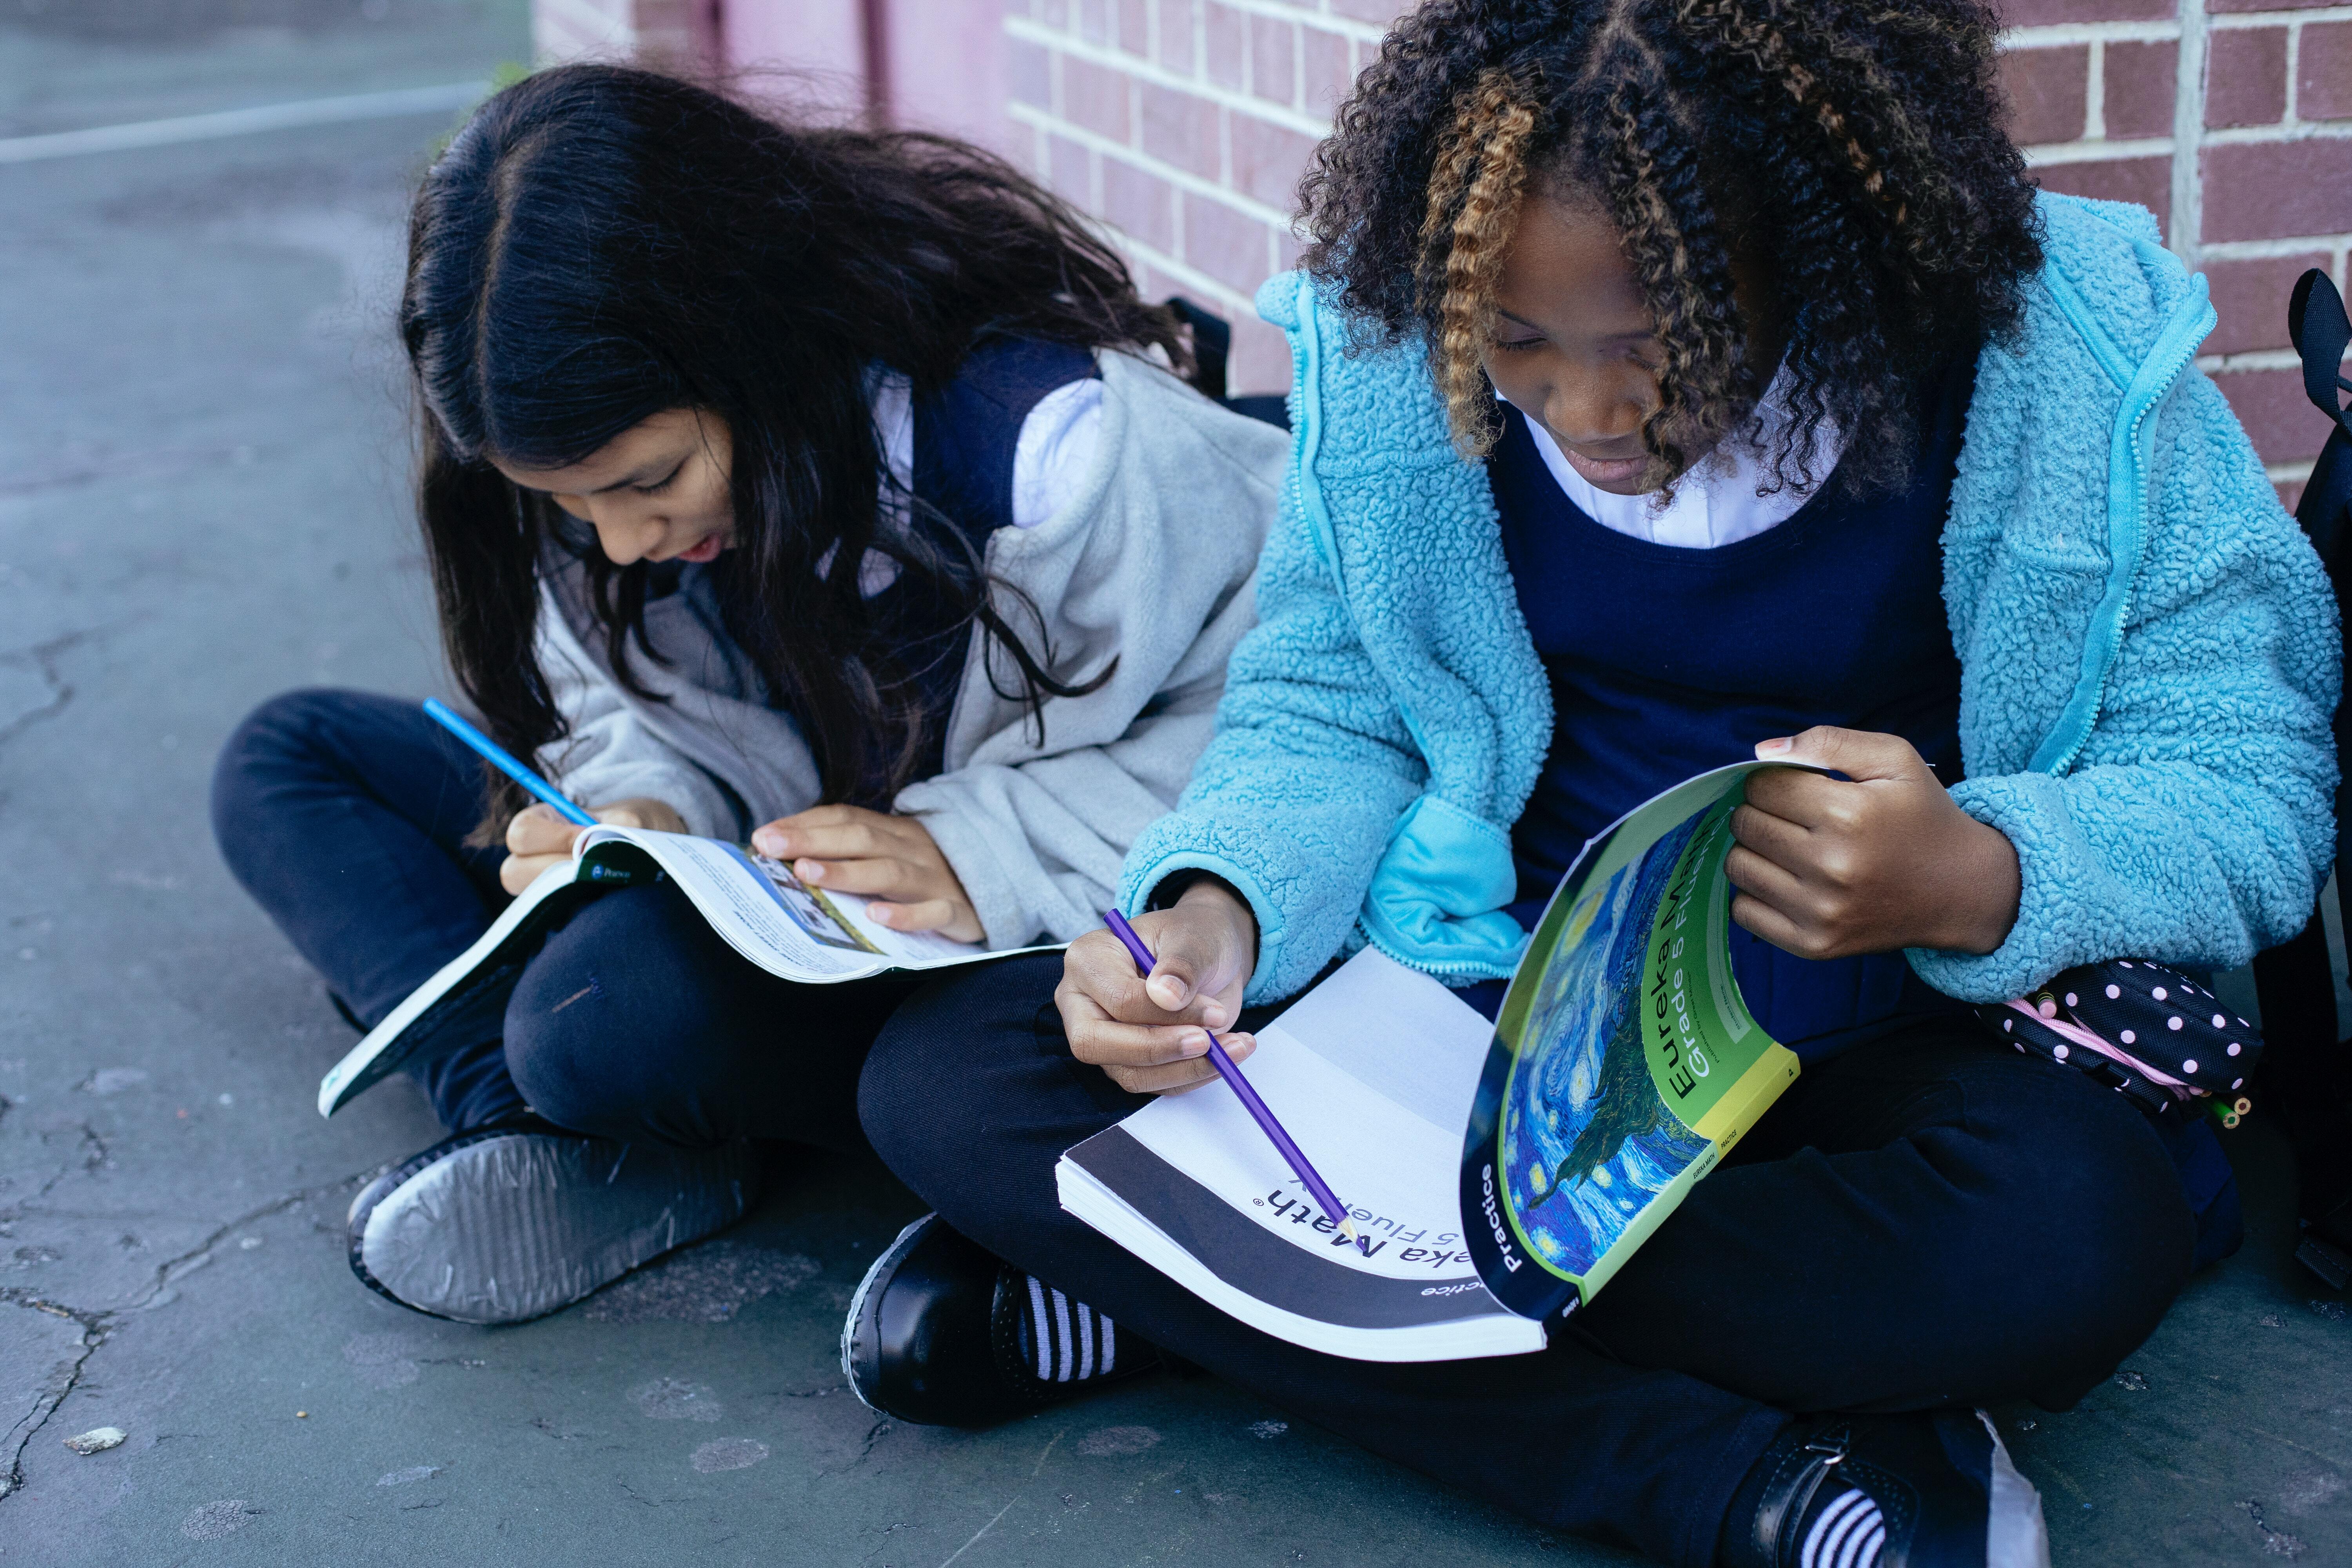 Two school children sitting on the floor while writing